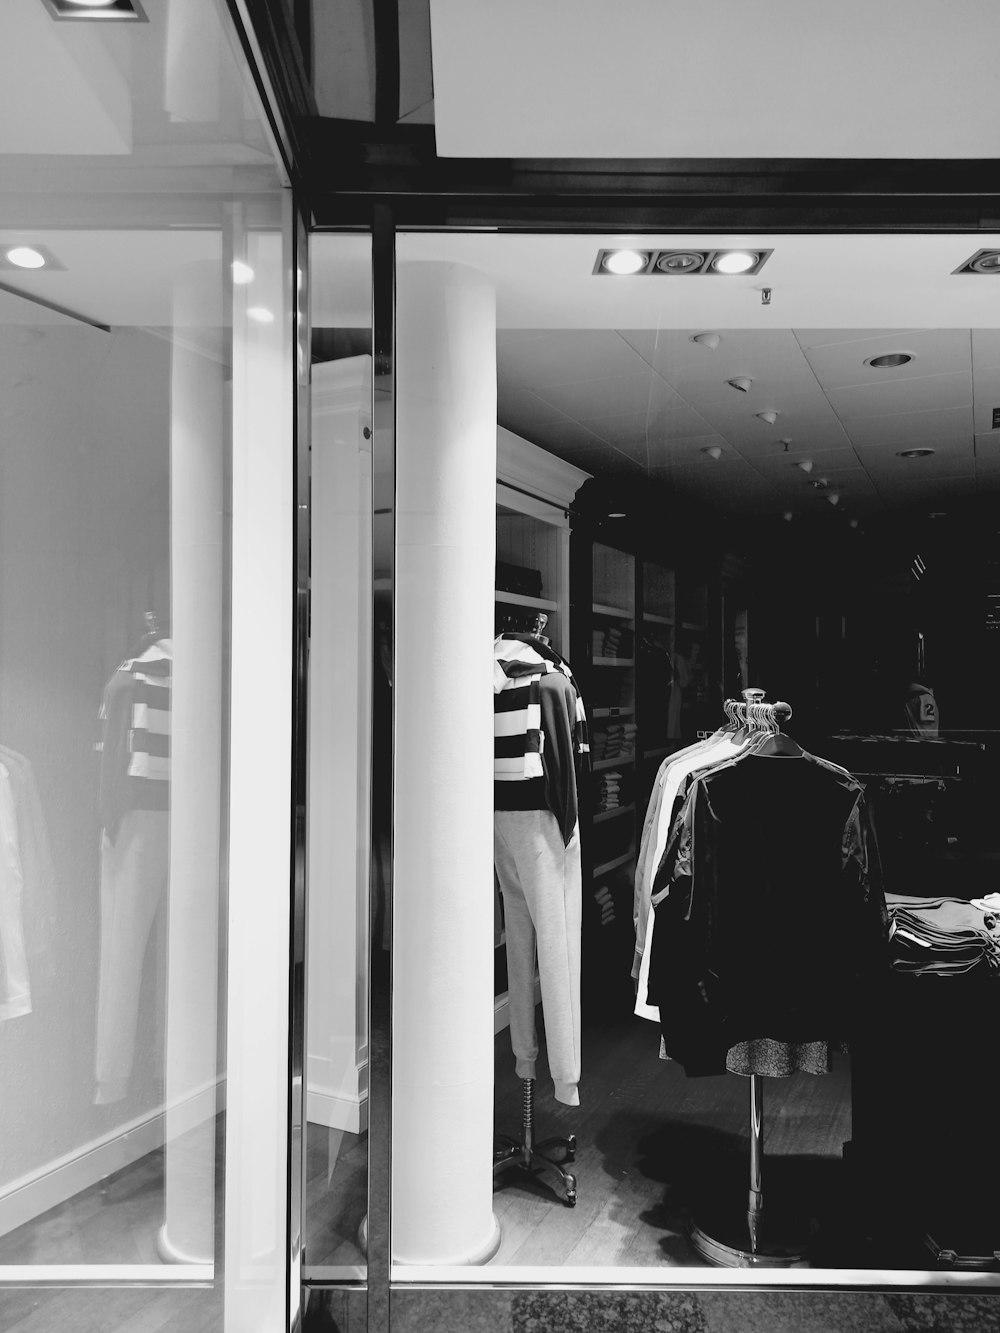 a black and white photo of a clothing store